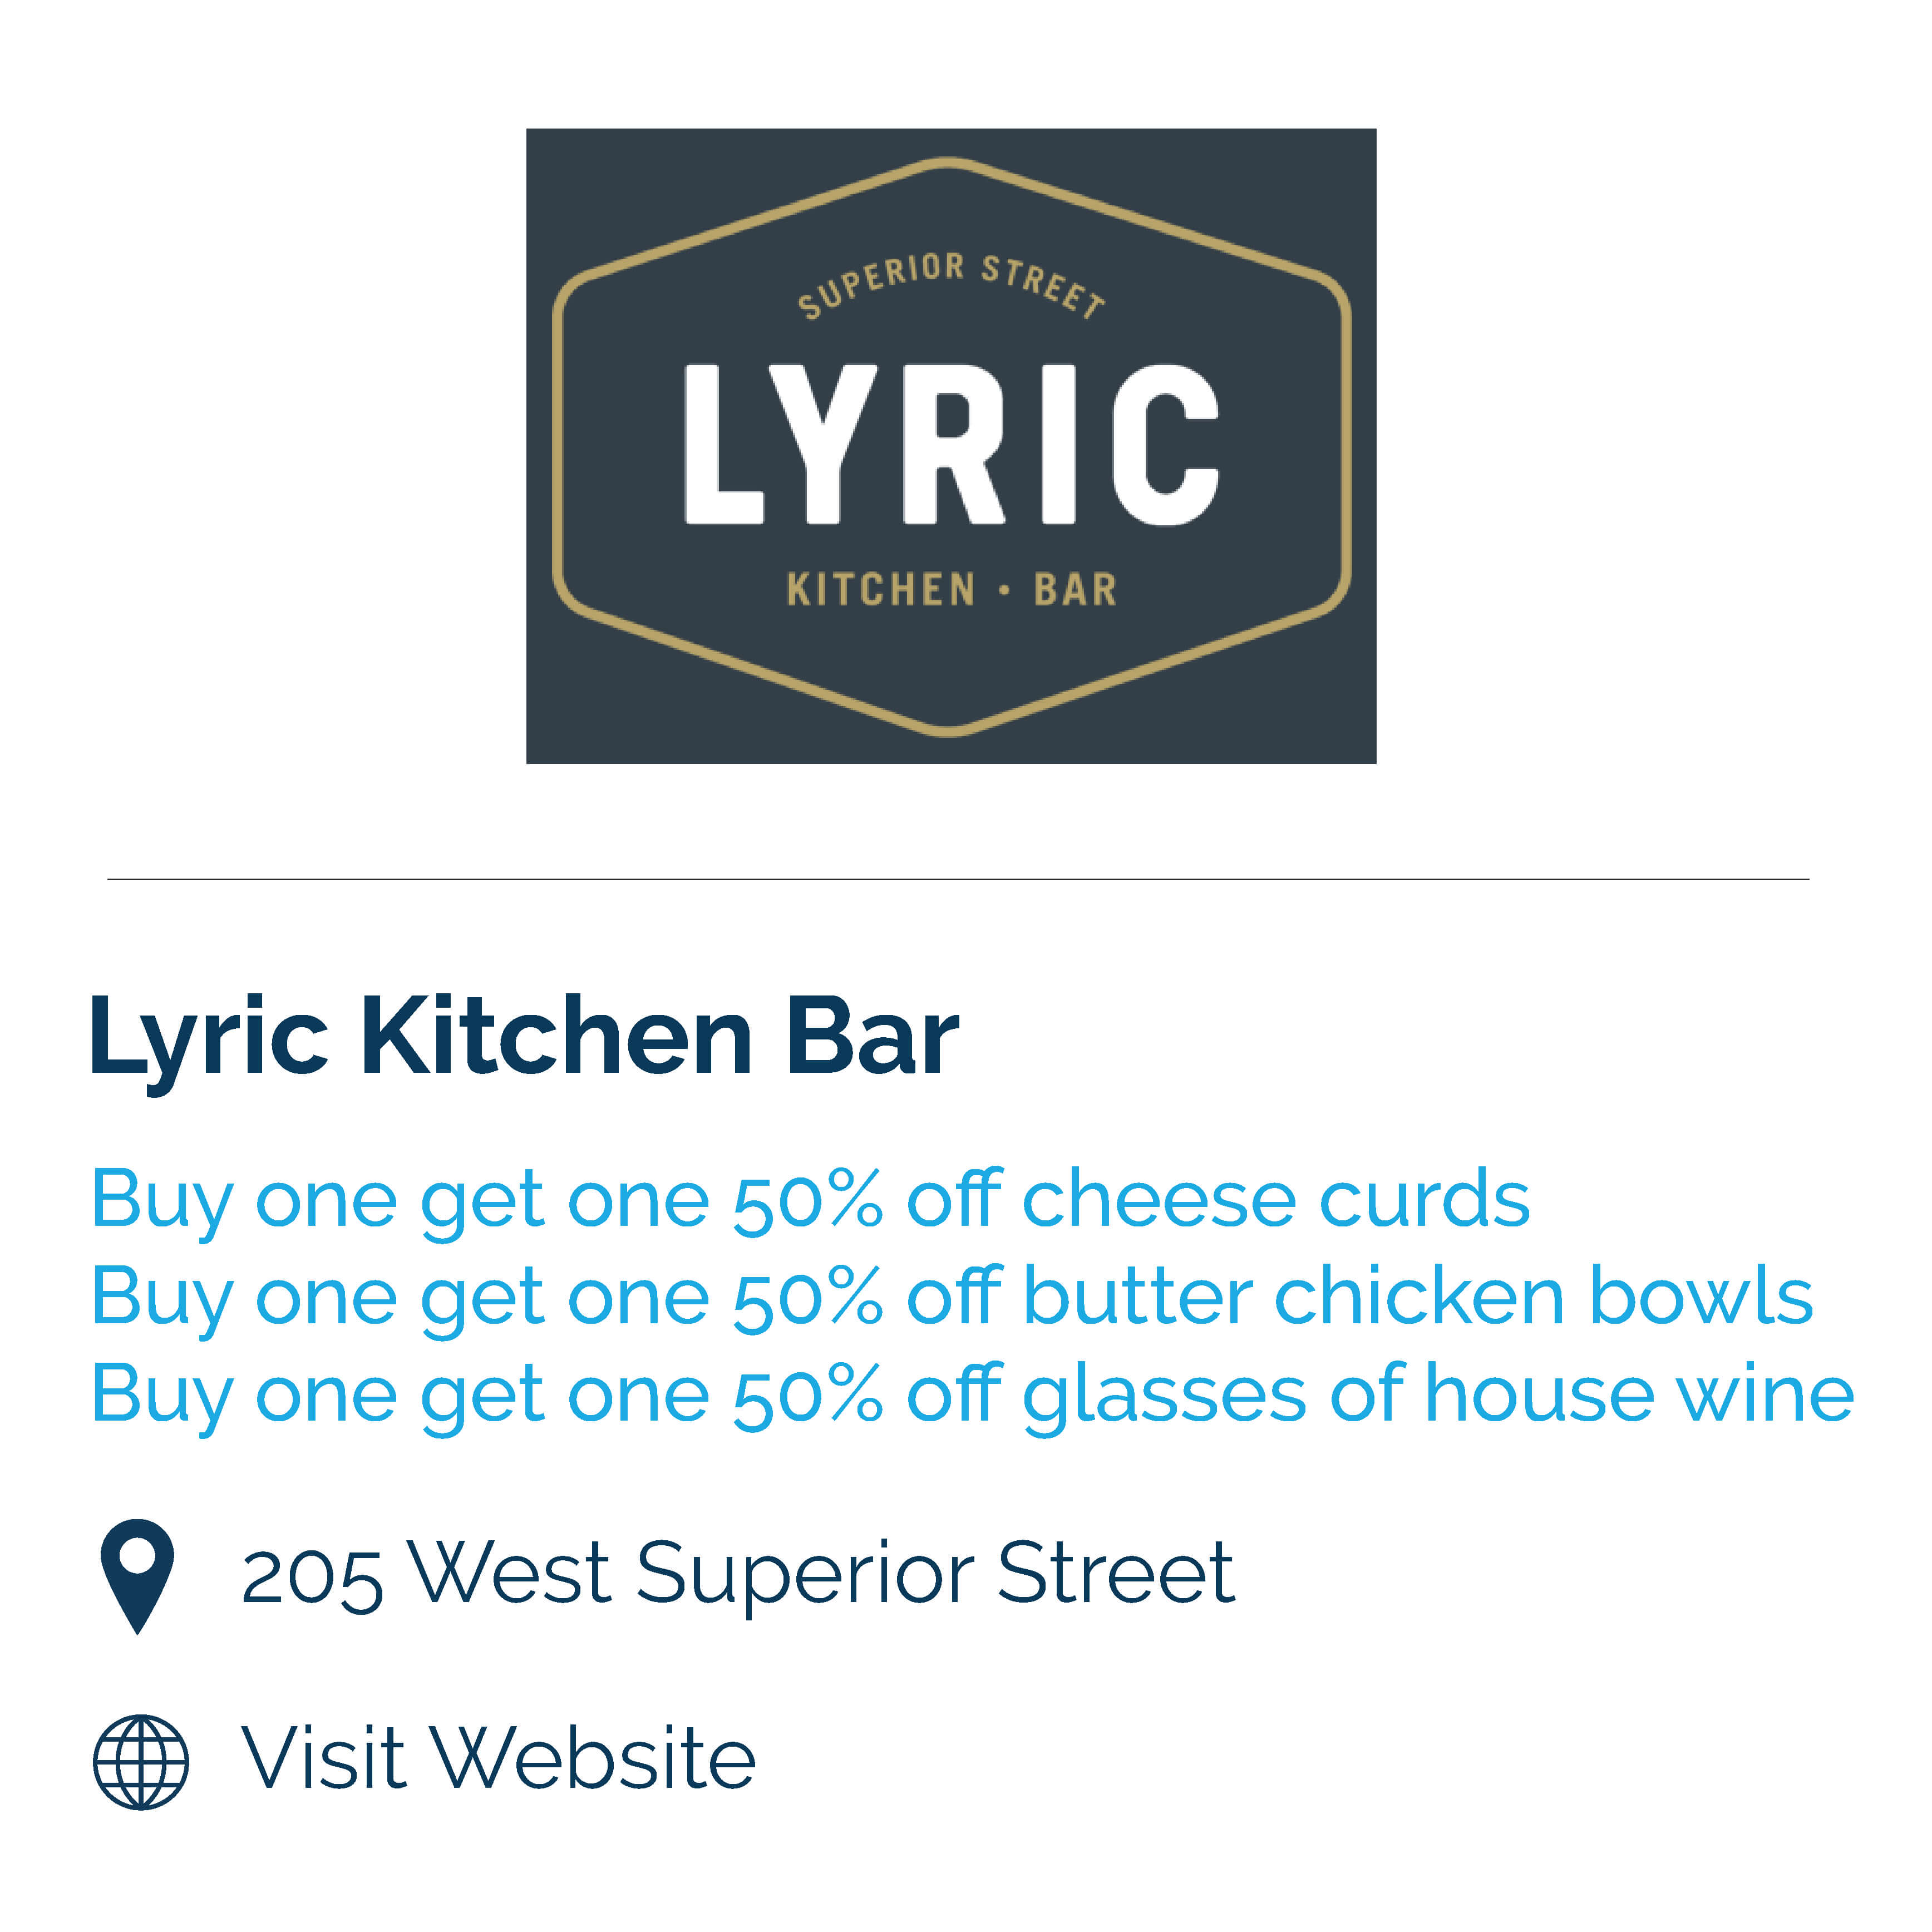 lyric kitchen bar. buy one get one 50% off cheese curds. buy one get one 50% off butter chicken bowls. Buy one get one 50% off glasses of house wine. 205 west superior street